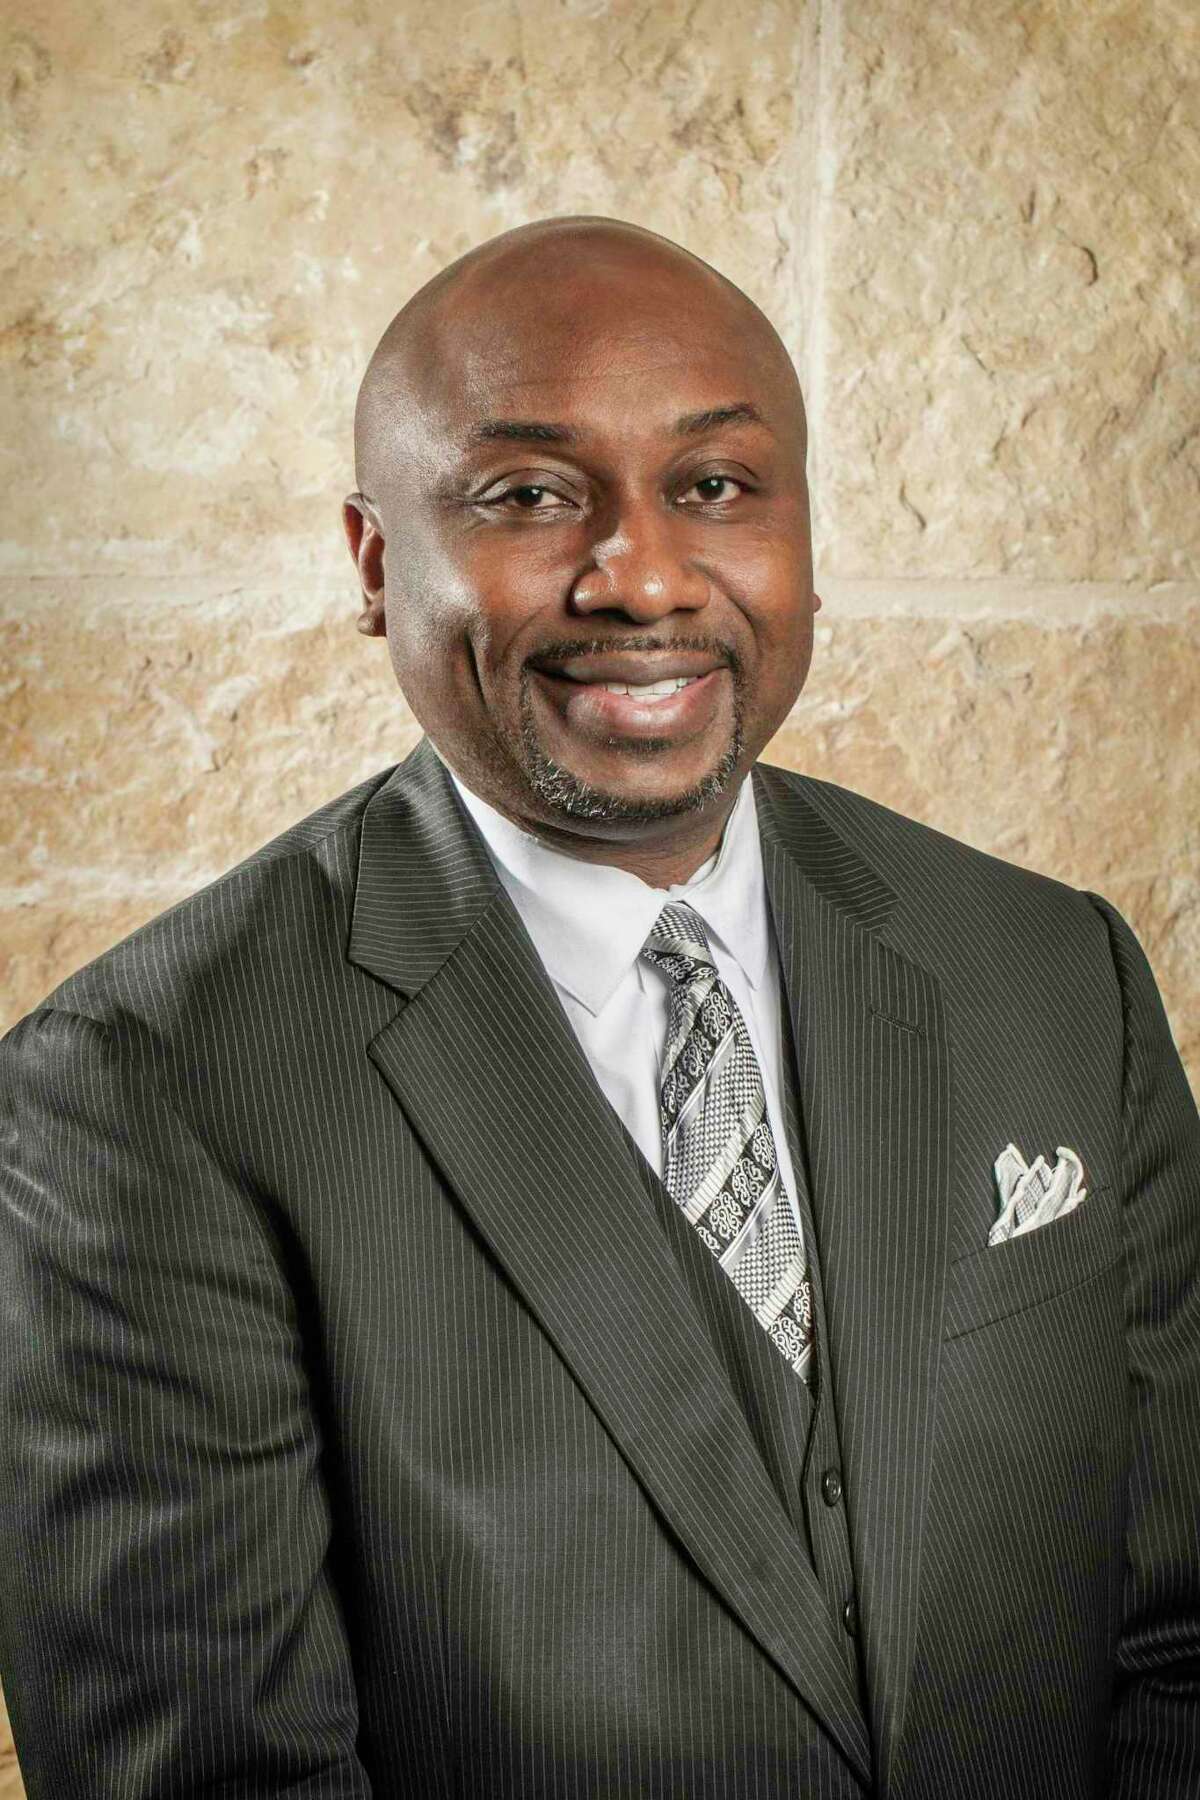 Missouri City Councilmembers unanimously voted on Nov. 16 to appoint Anthony Snipes as the municipality’s seventh city manager. Snipes becomes the first African-American City manager to serve the residents.